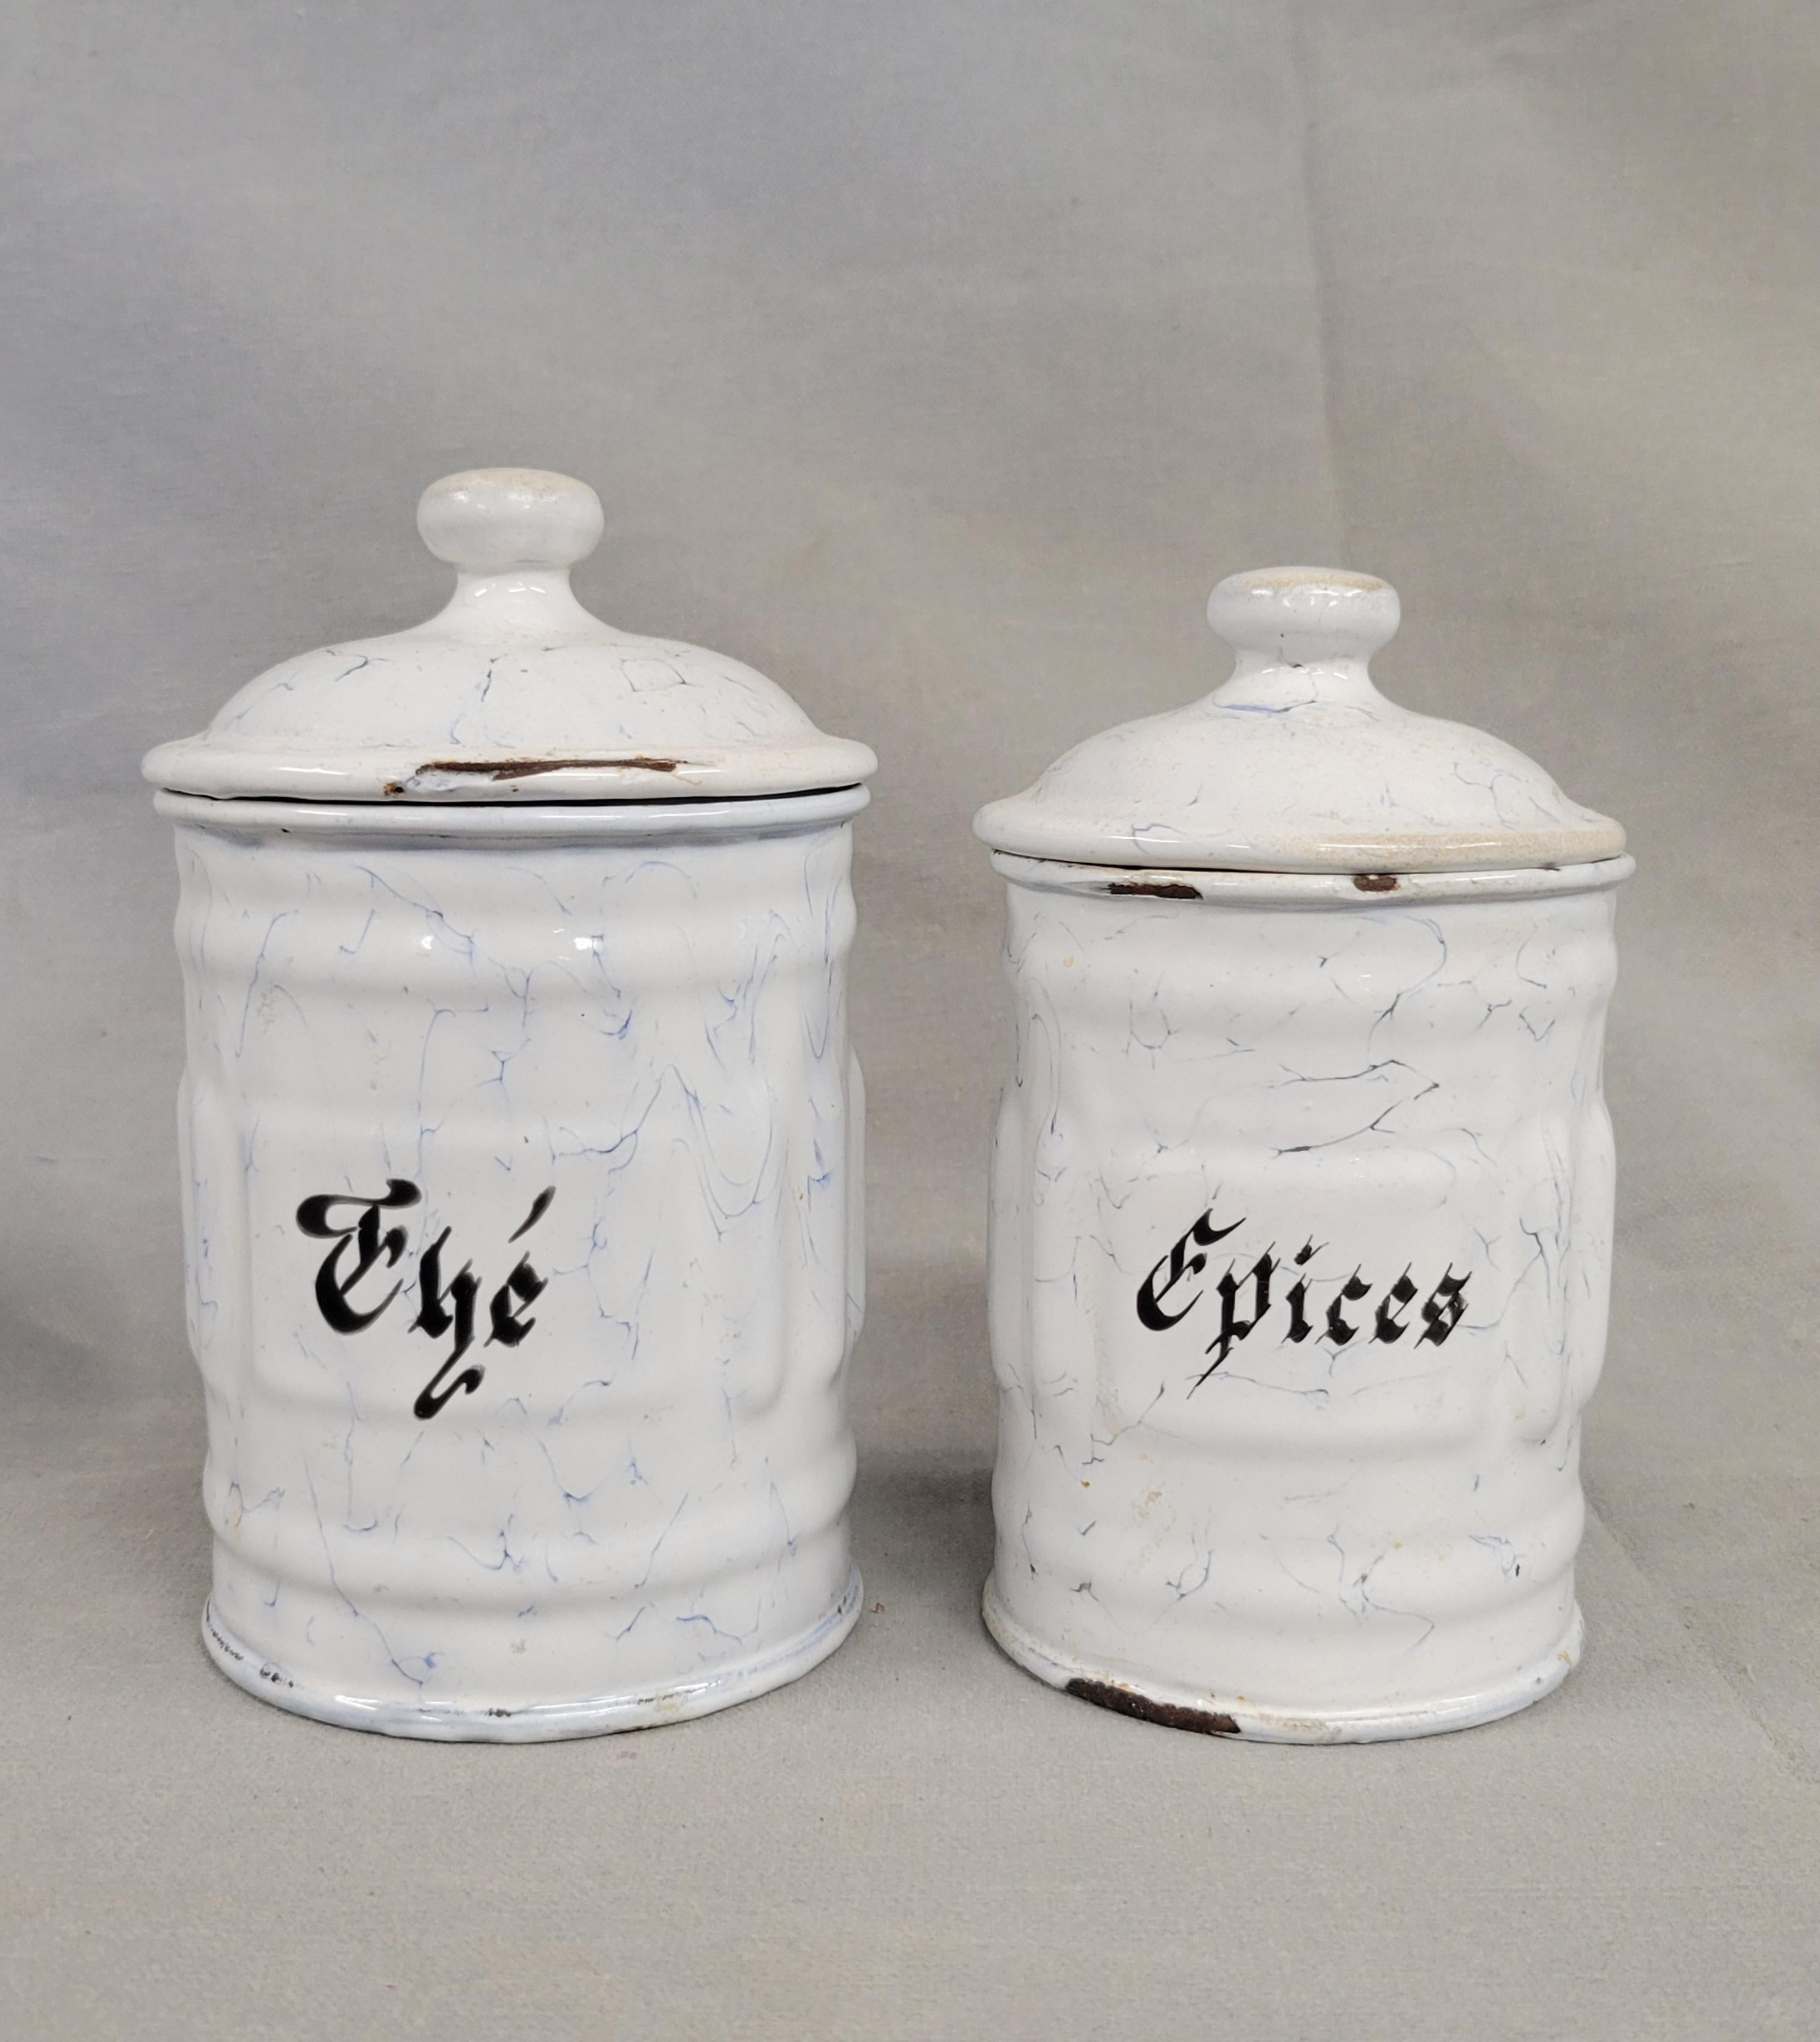 Antique French White and Blue Enamel Canister Set - 6 Pieces In Good Condition For Sale In Centennial, CO